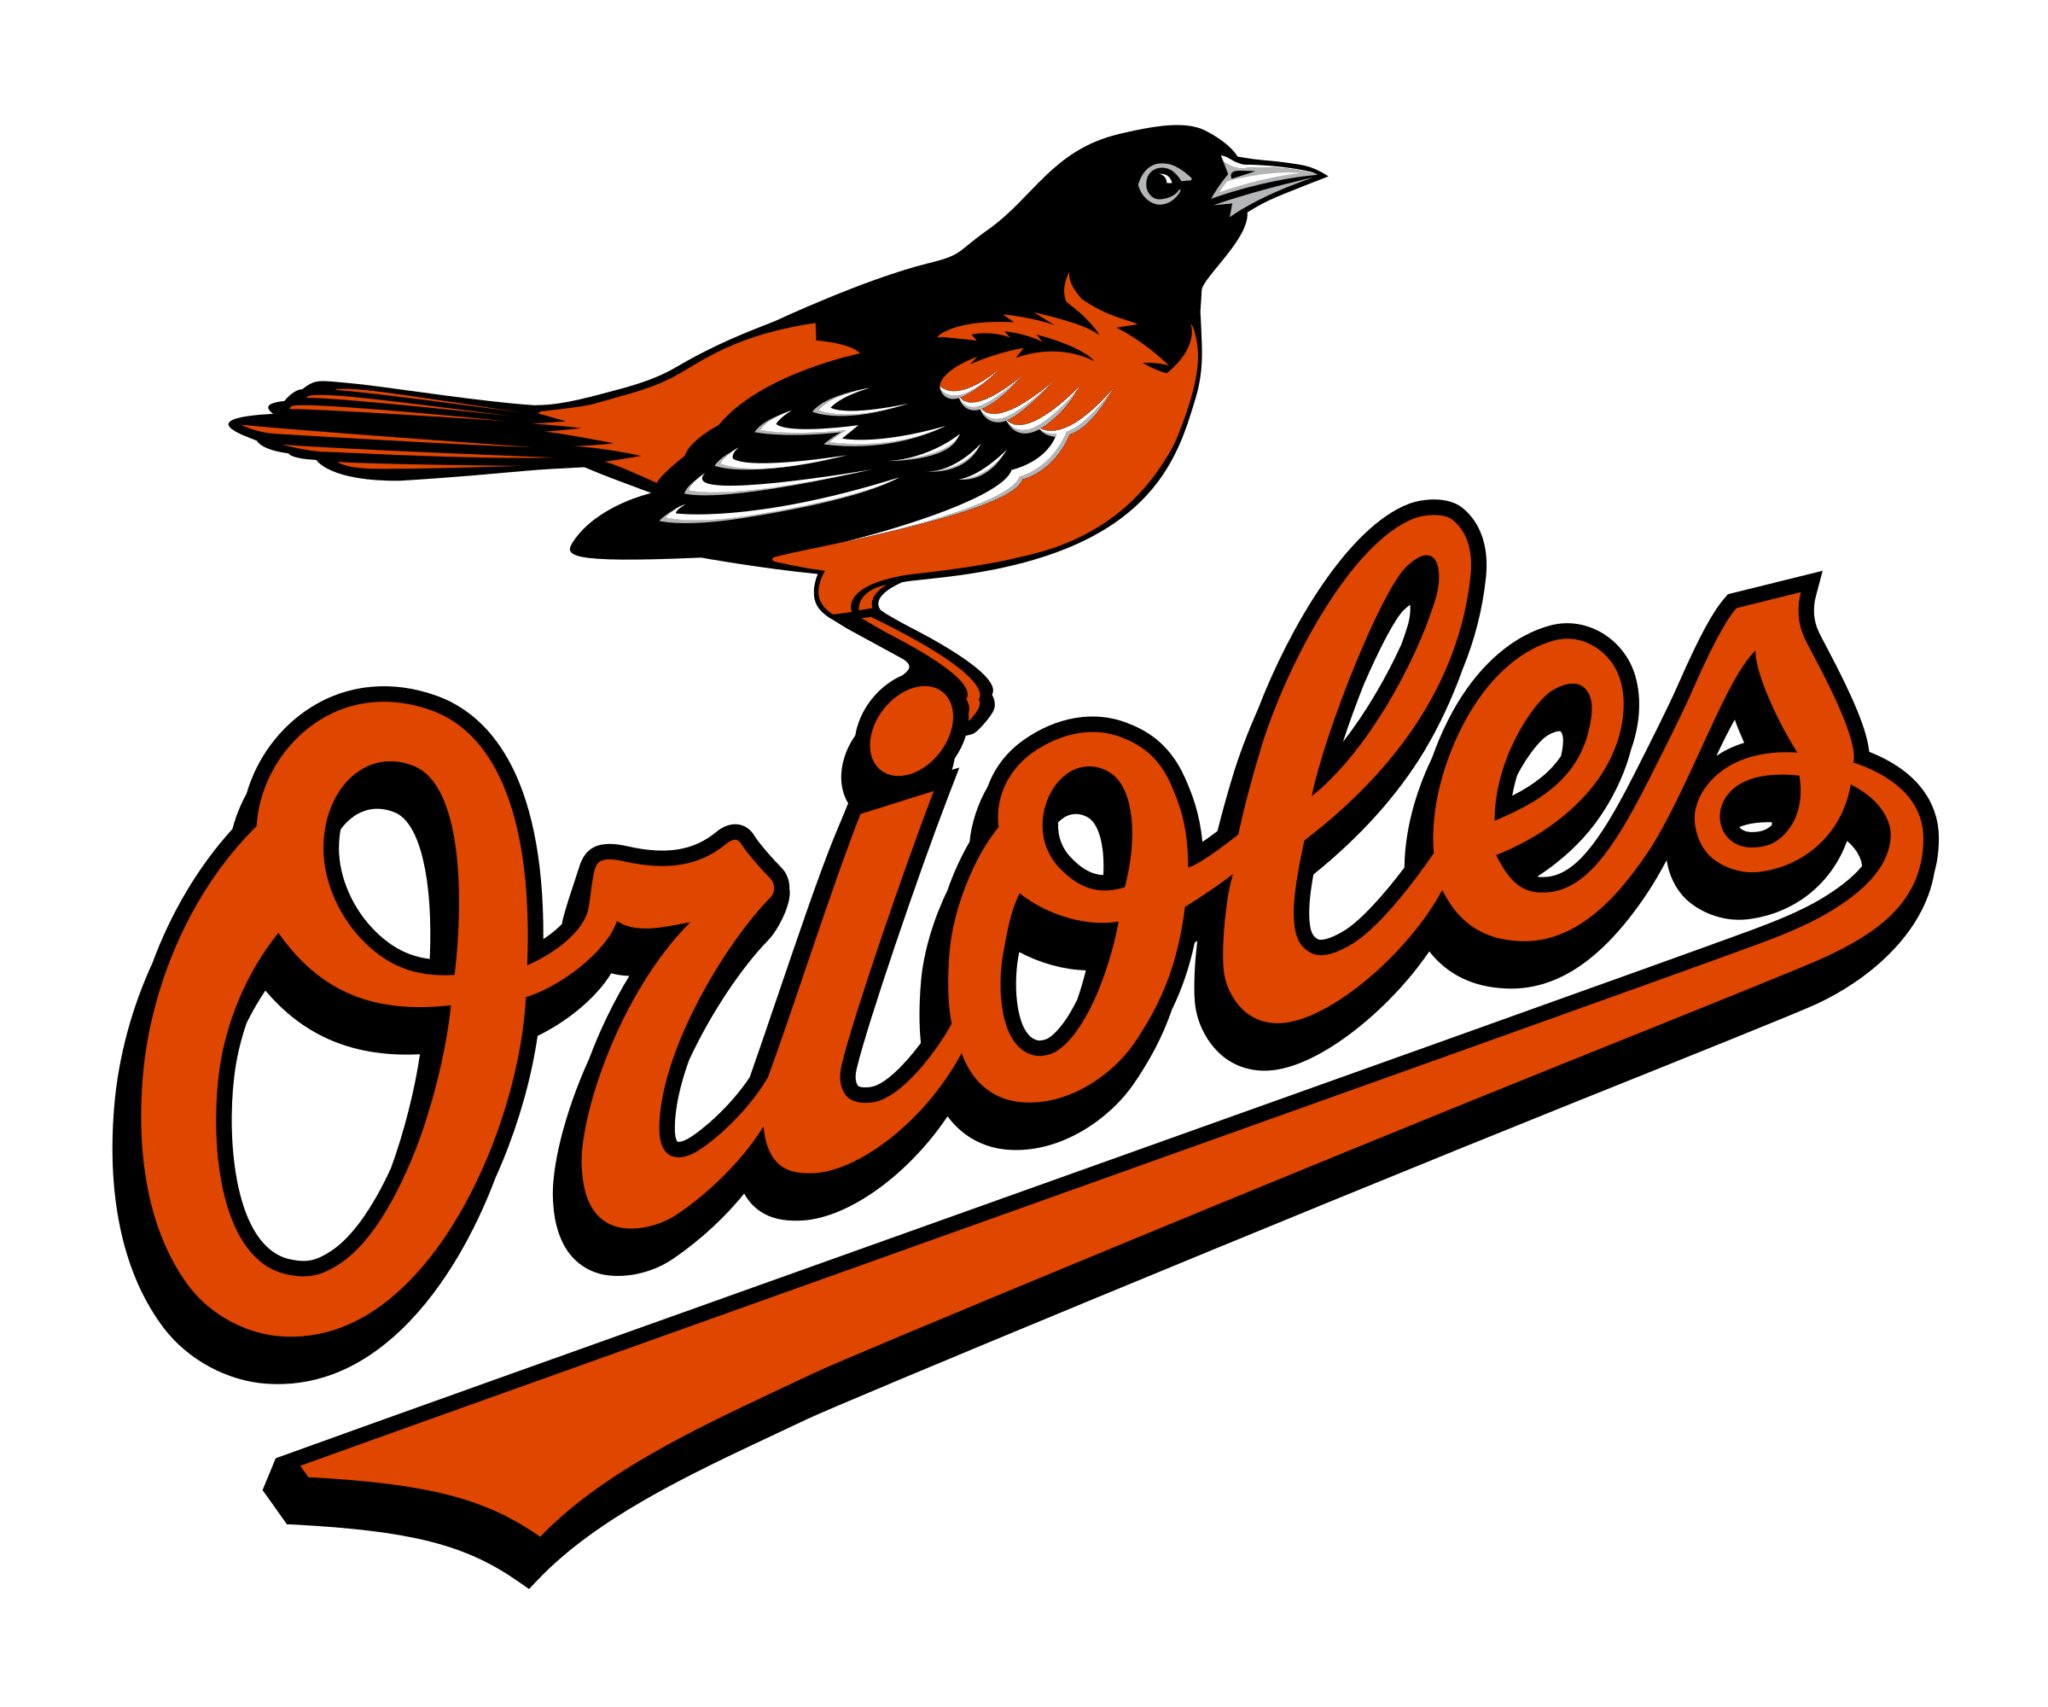 The Orioles offer $250Million to two star players